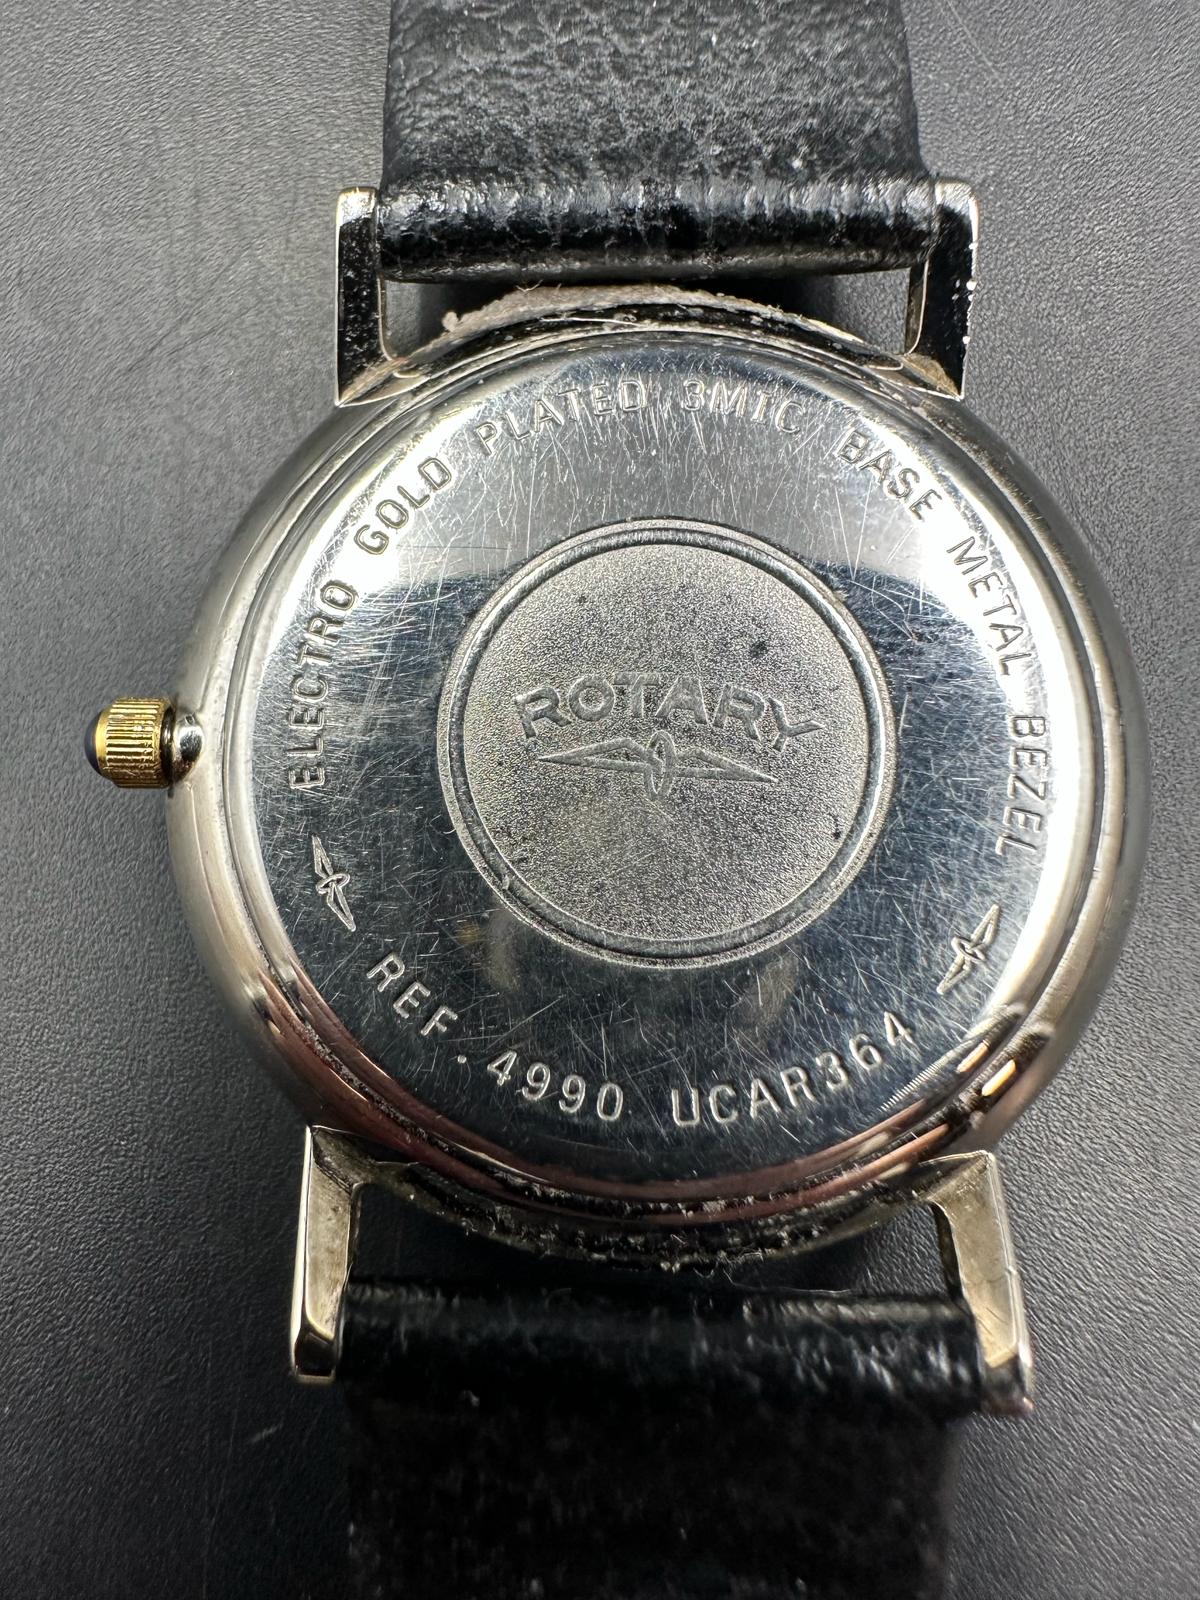 A Rotary wristwatch on leather strap, gold plated, model reference number 4990 UCAR 364 - Image 4 of 6